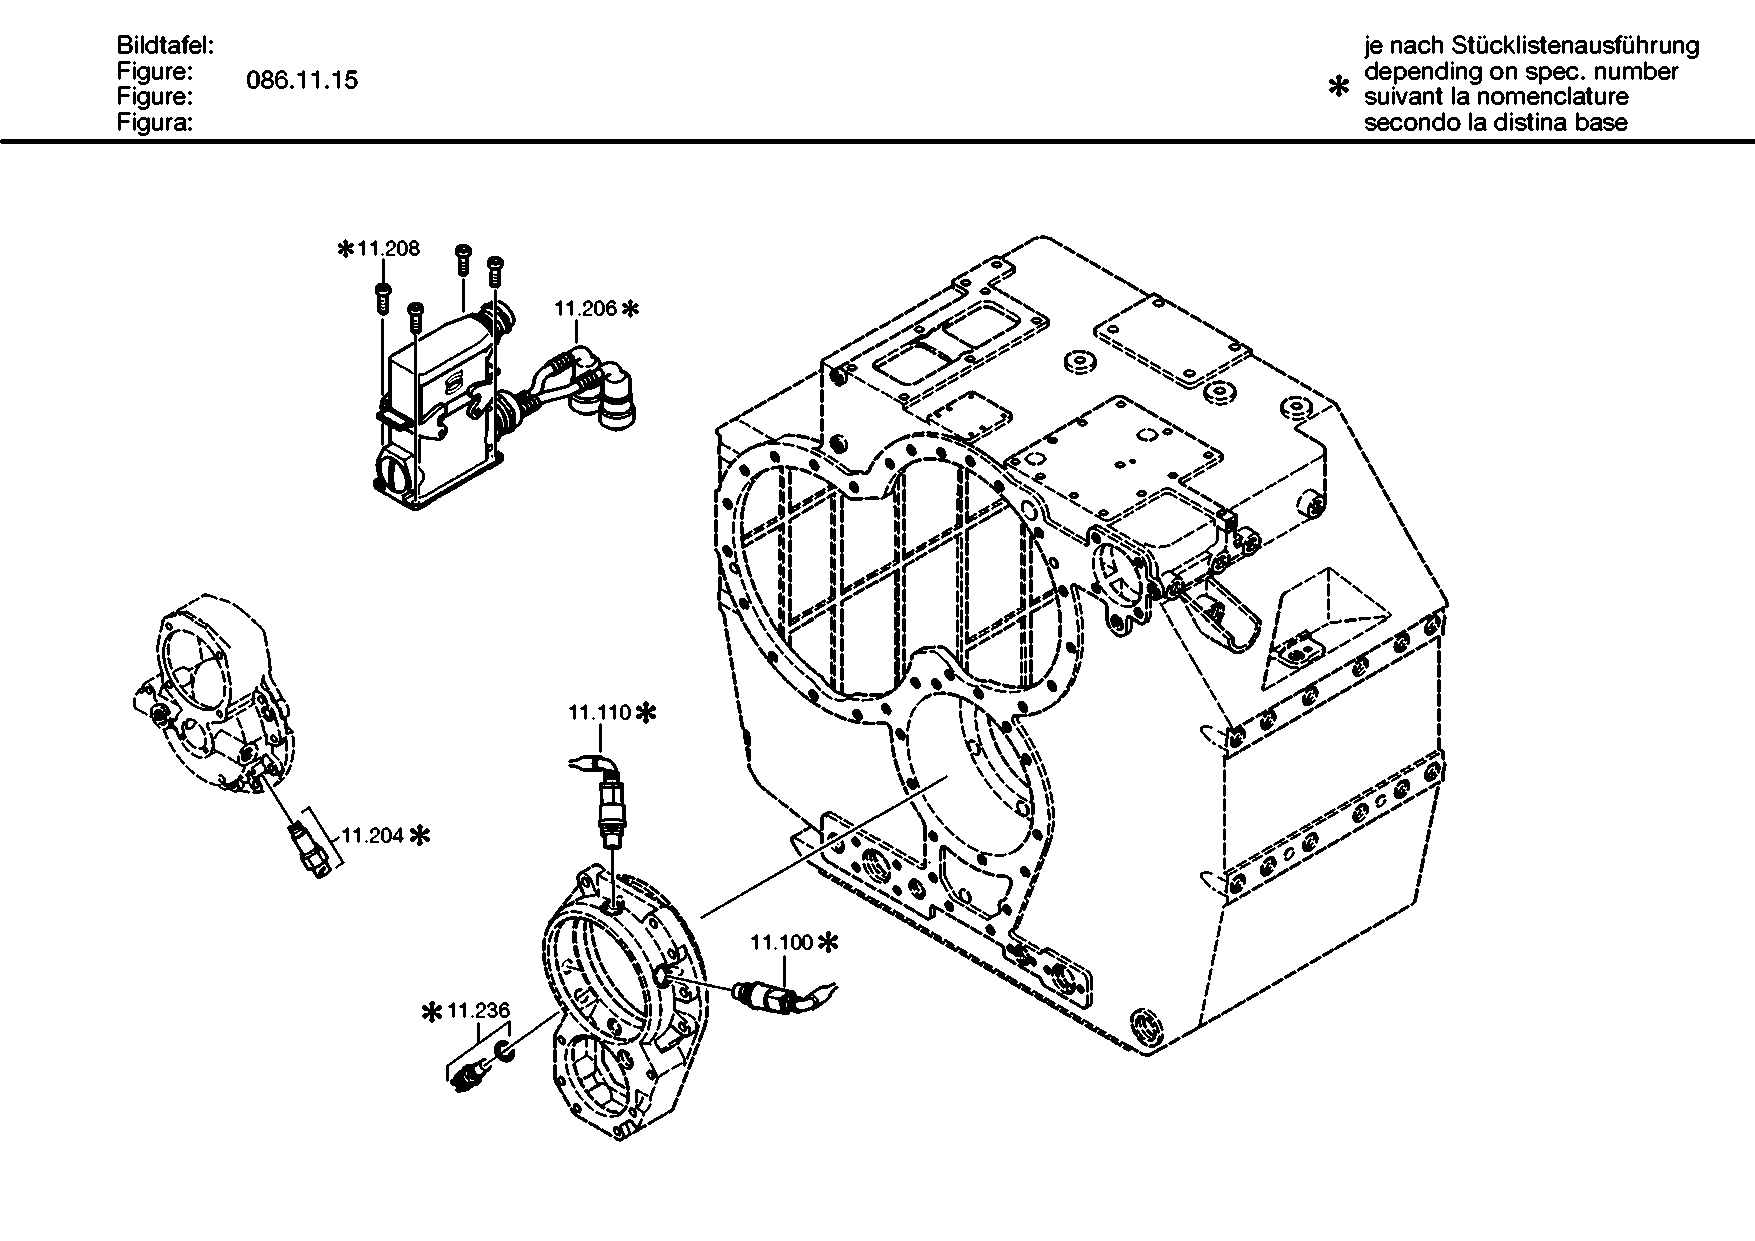 drawing for LANG GMBH 570269708 - INDUCTIVE TRANSMITTER (figure 1)